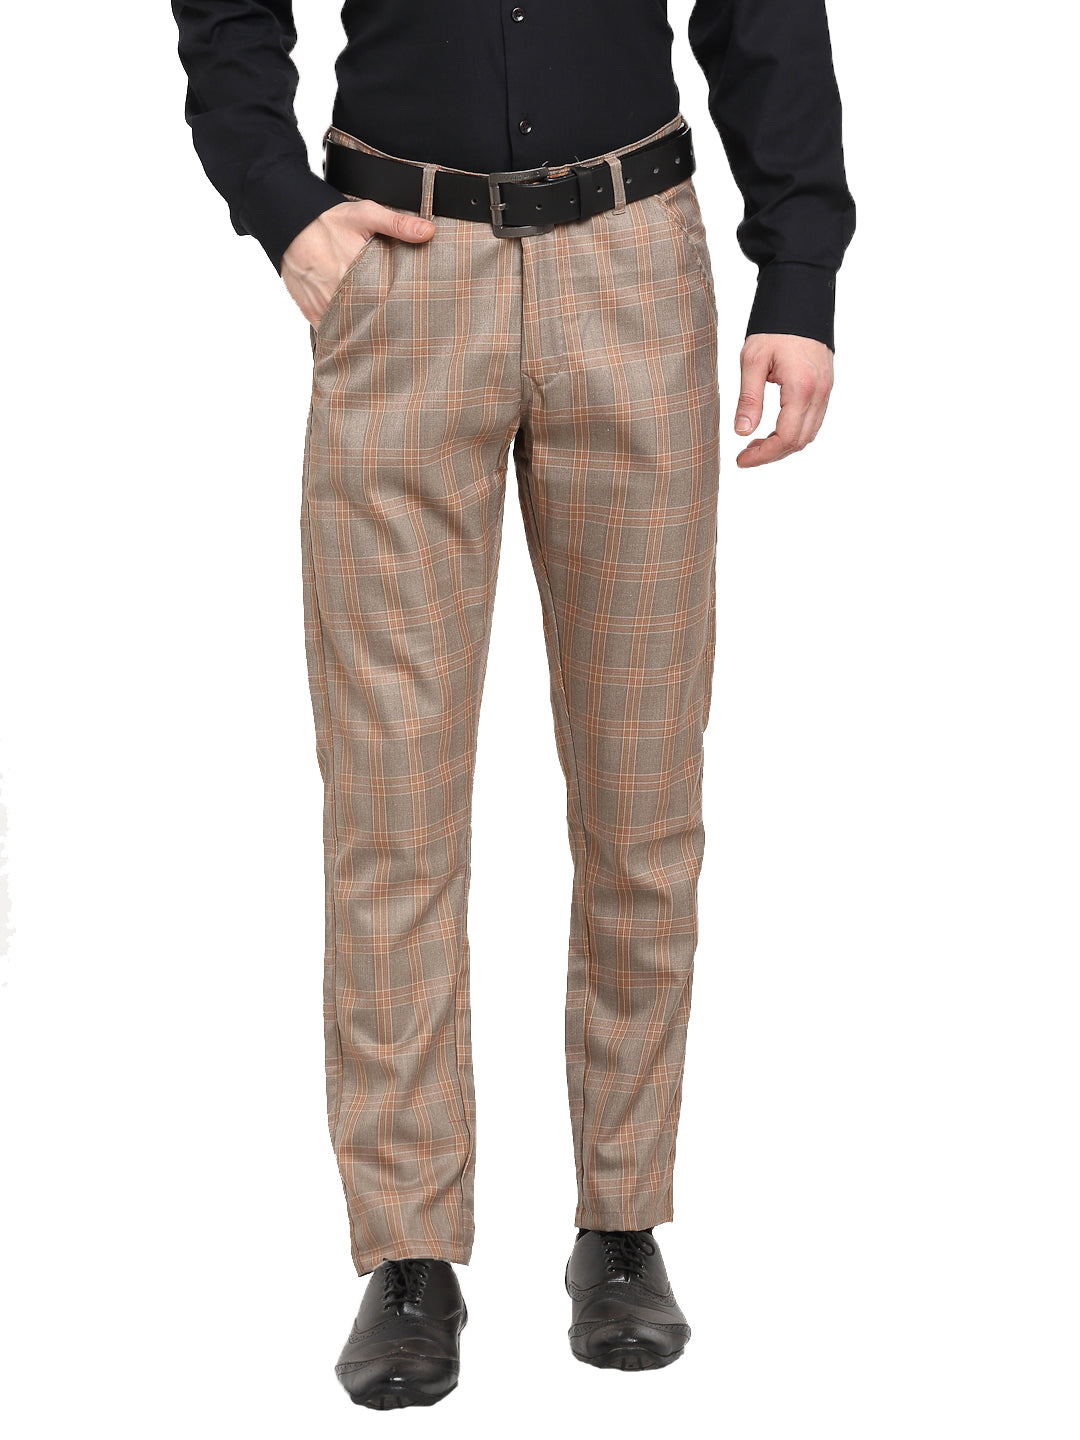 uNidraa | Blue White Checked Printed Cotton Lounge Pants For Men